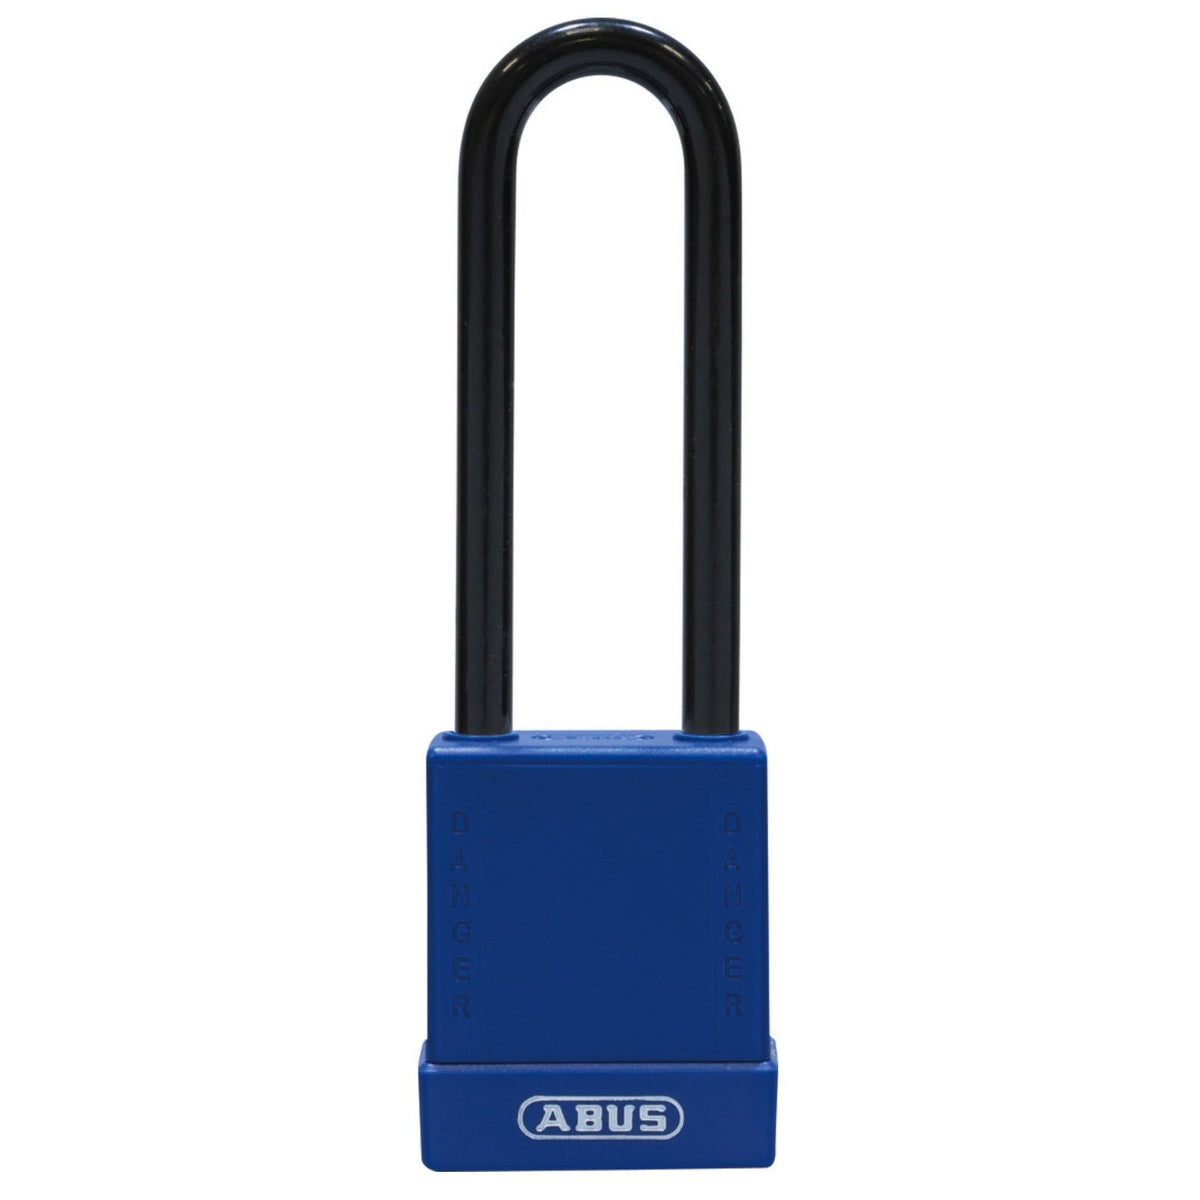 Abus 76PS/40 Blue Safety Lock with 3-Inch Steel Shackle Covered by Plastic Sleeve - The Lock Source